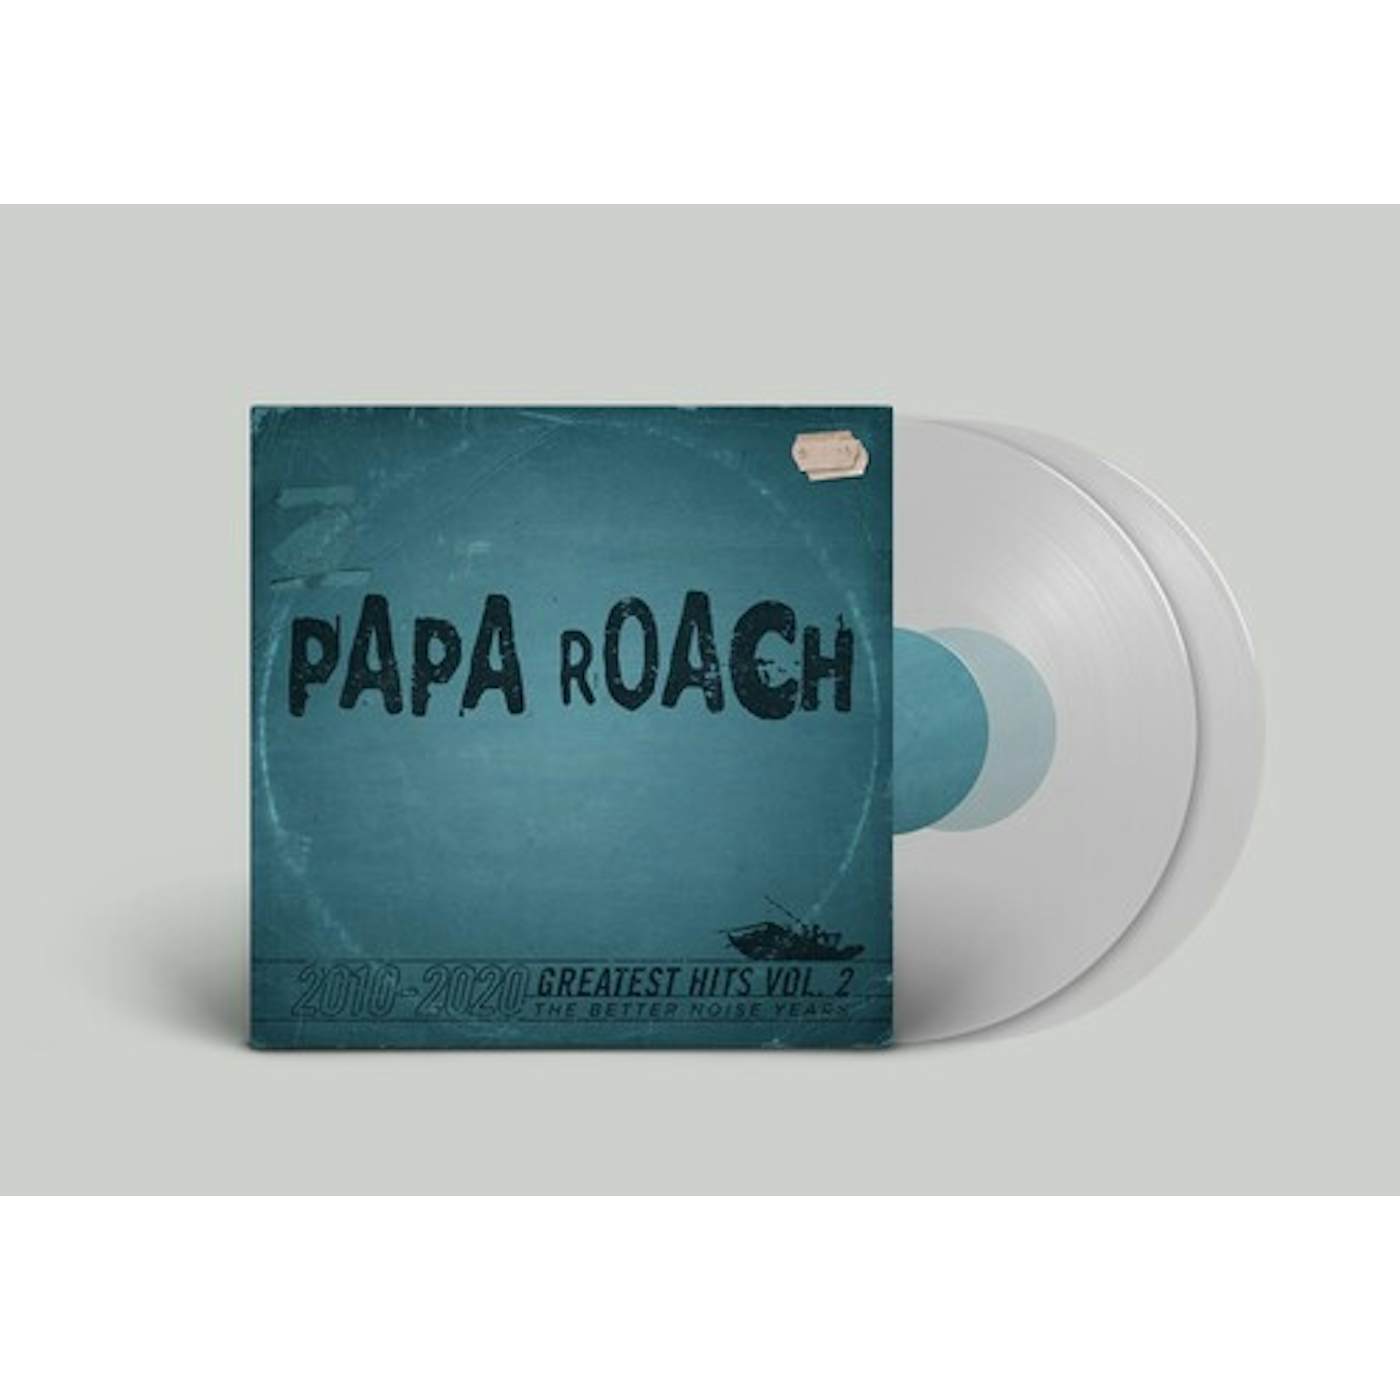 Papa Roach GREATEST HITS VOL. 2 THE BETTER NOISE YEARS (US) Vinyl Record